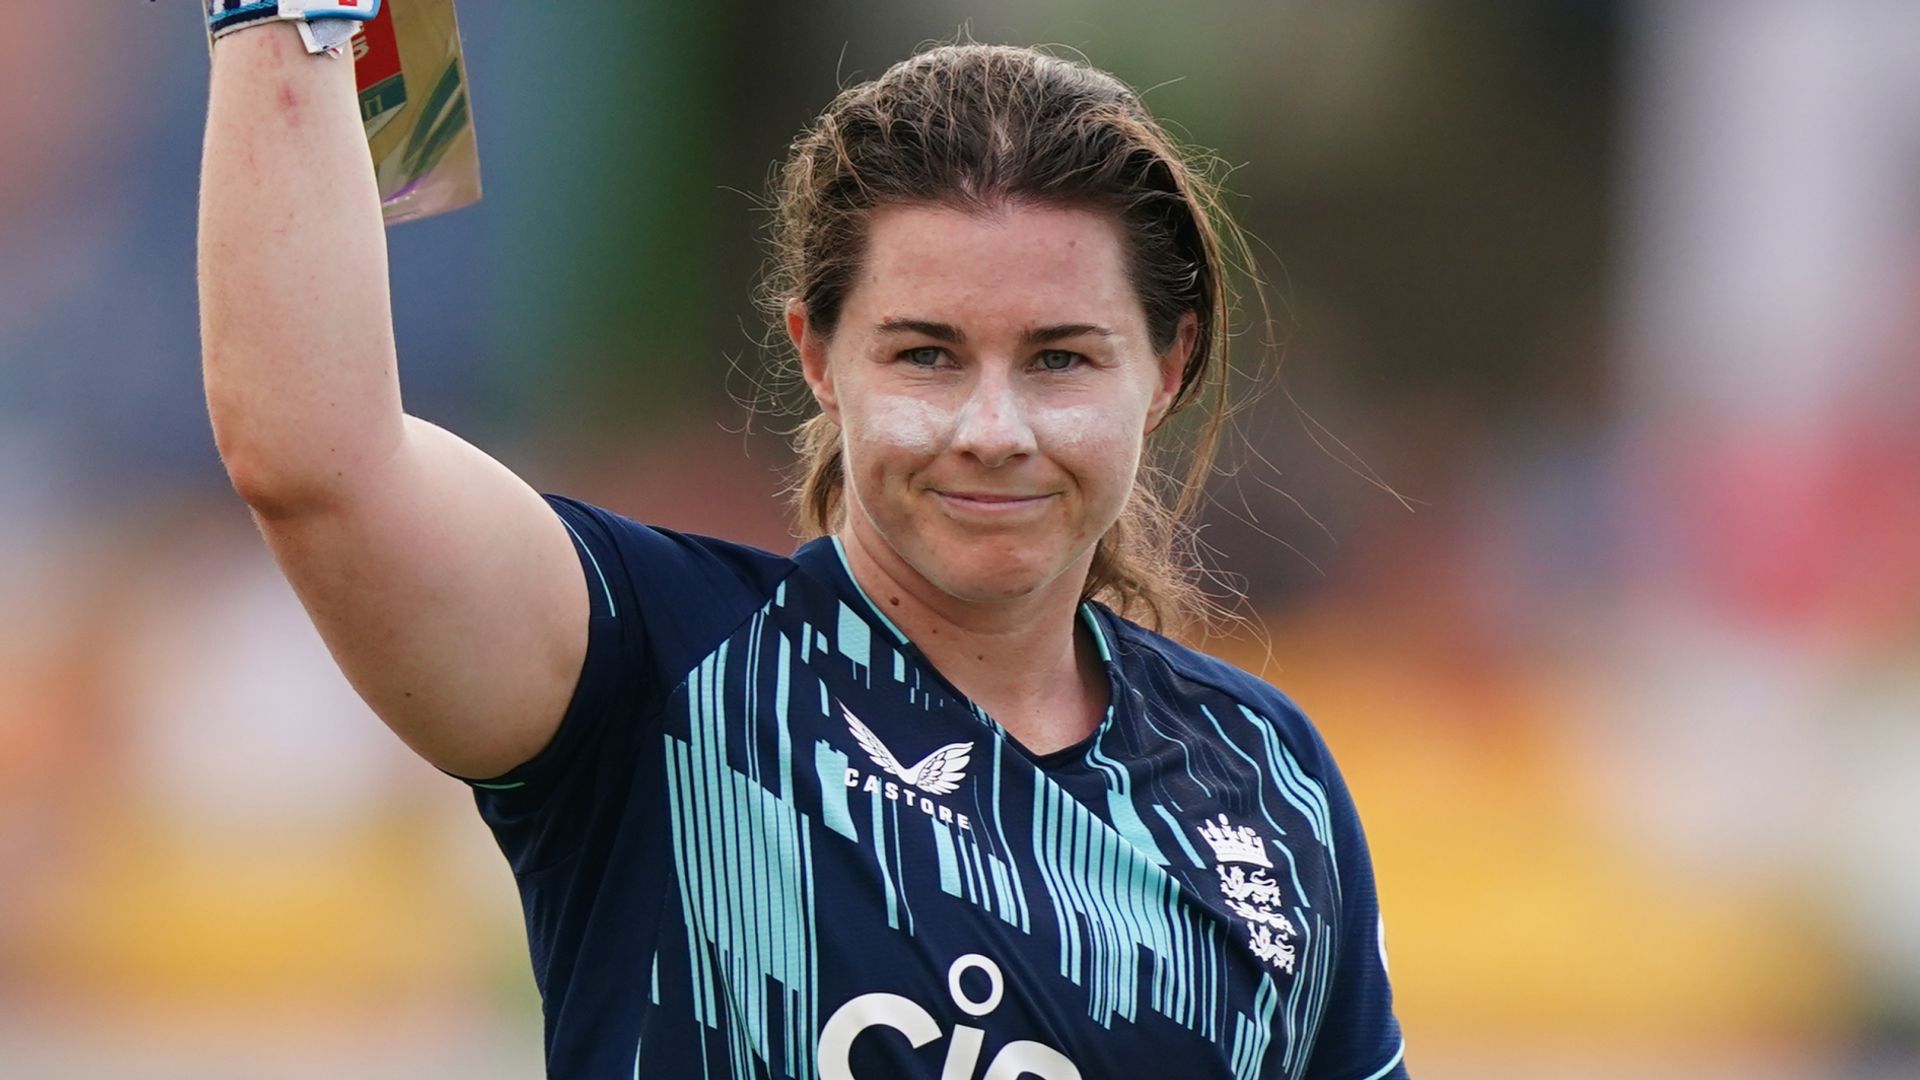 Beaumont ton sets up England win for ODI series sweep